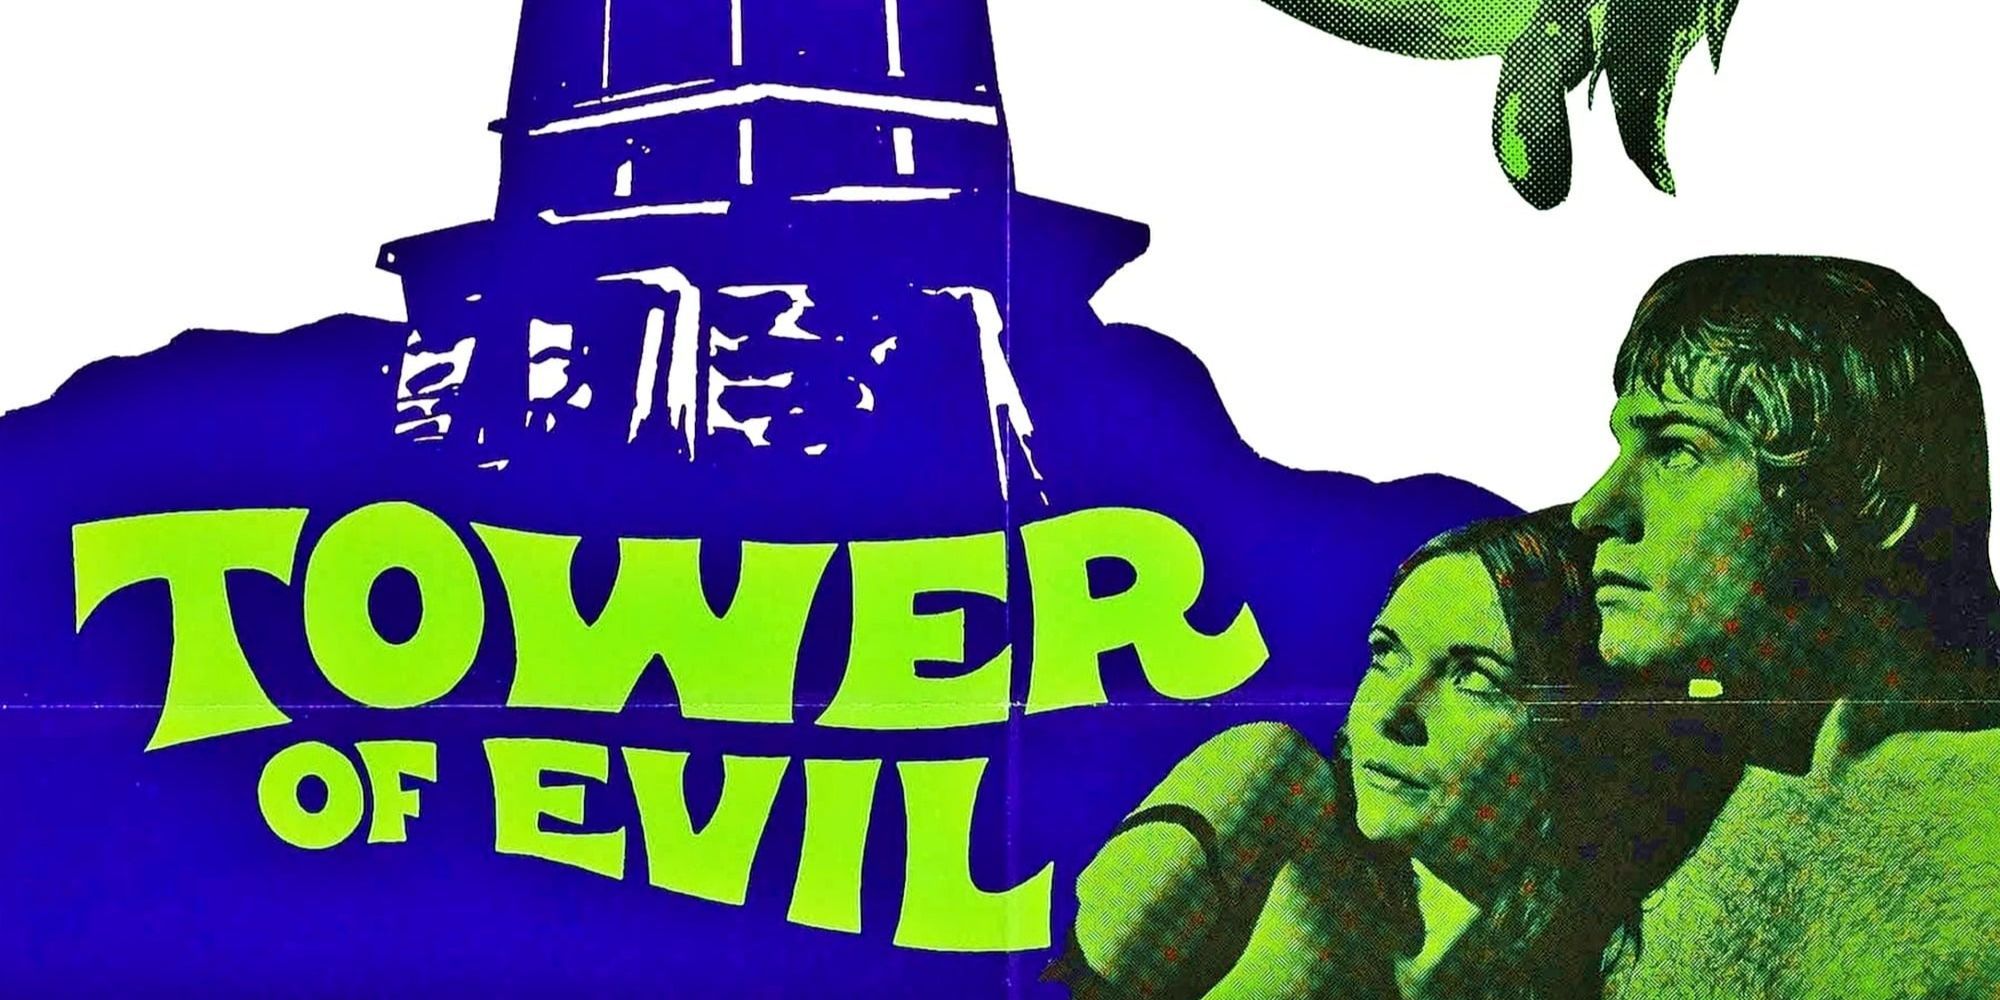 The theatrical poster for Tower of Evil featuring a man and woman